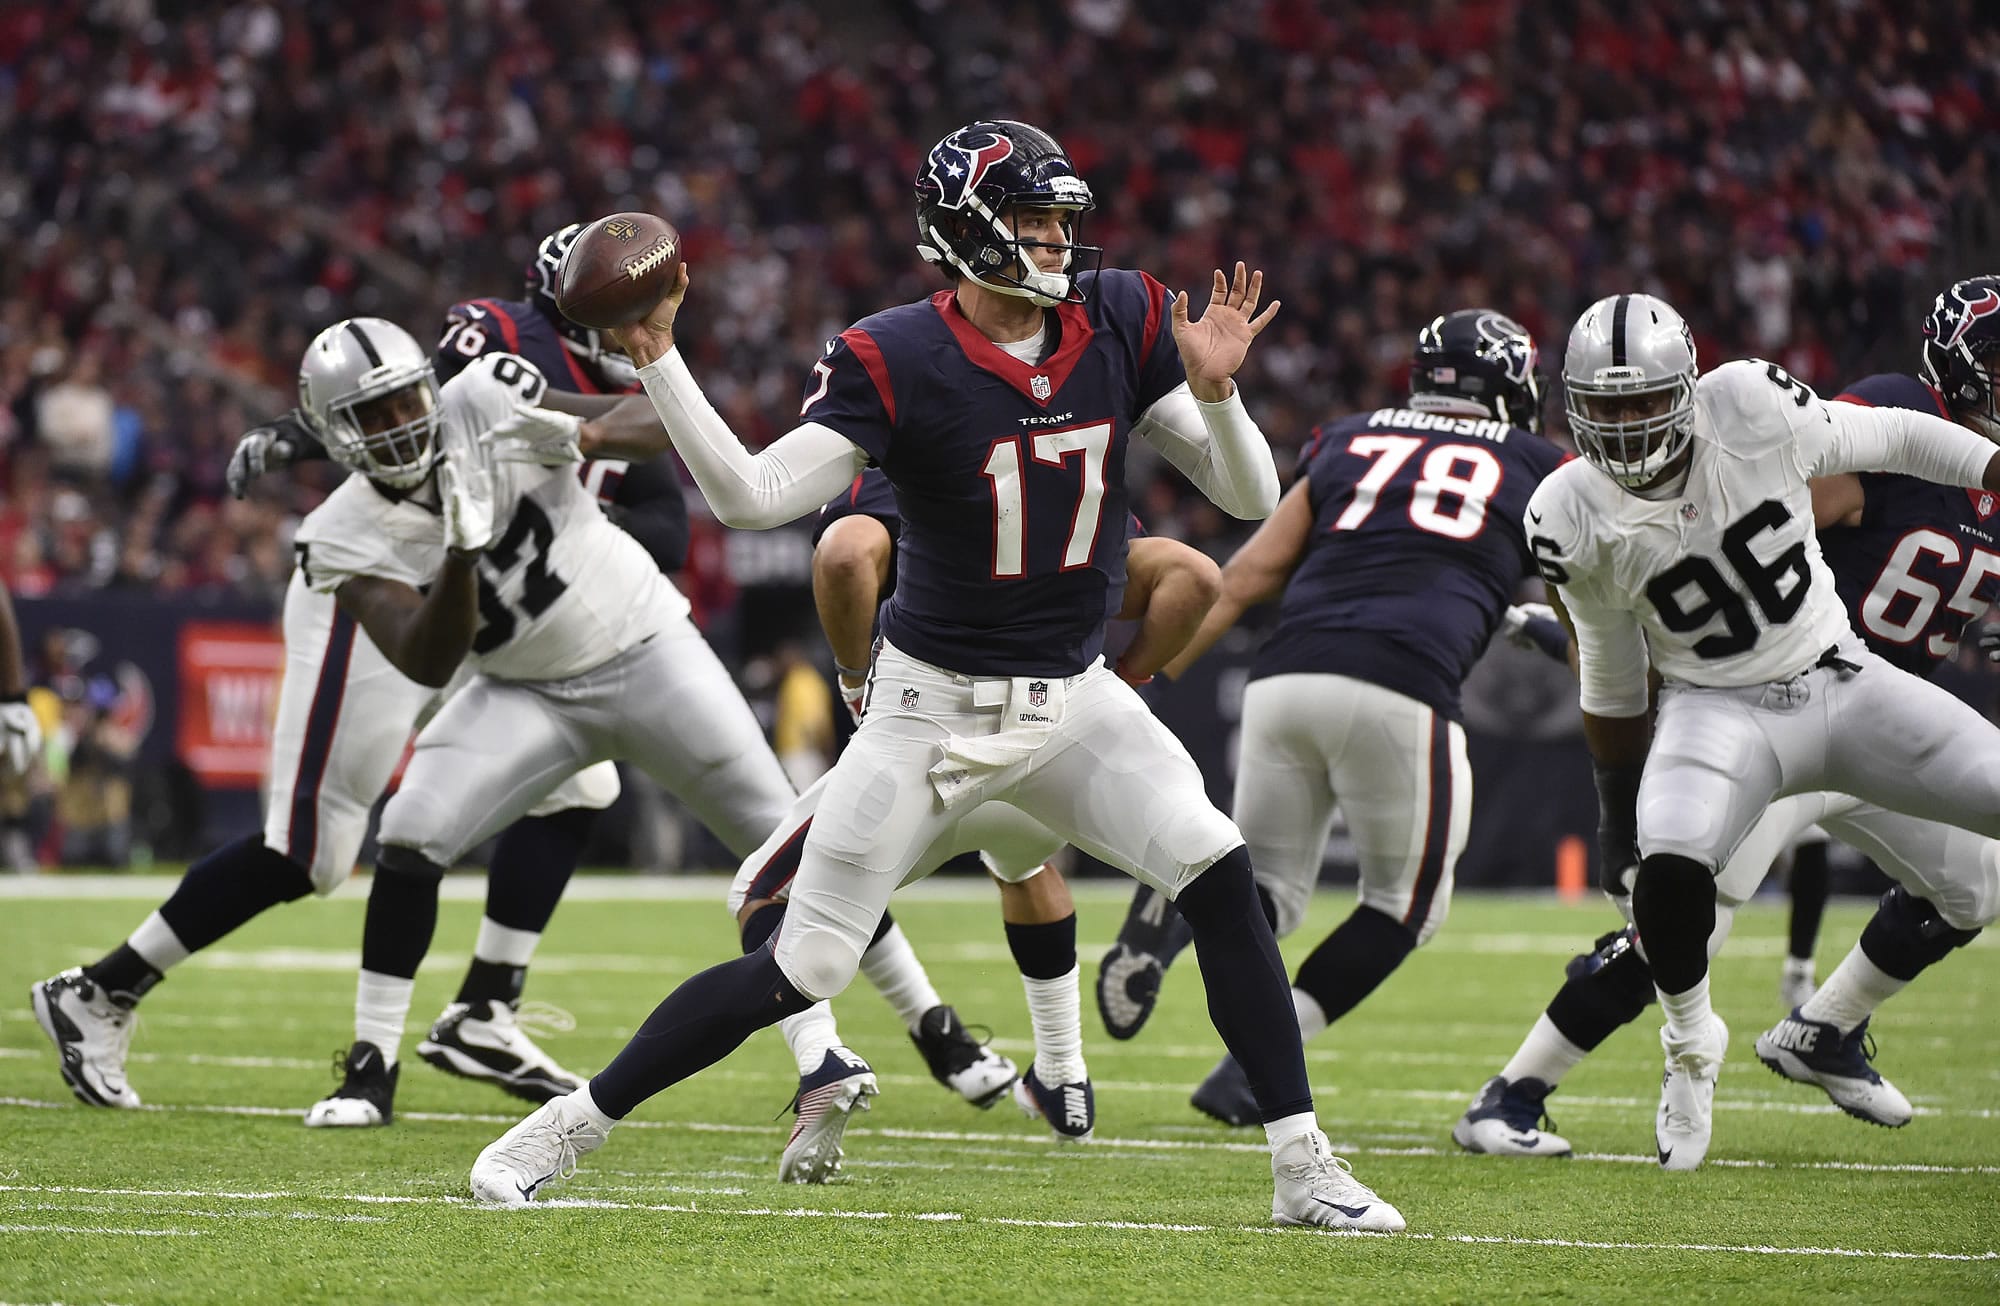 Houston Texans quarterback Brock Osweiler (17) works against the Oakland Raiders during the first half of an AFC Wild Card NFL game Saturday, Jan. 7, 2017, in Houston.